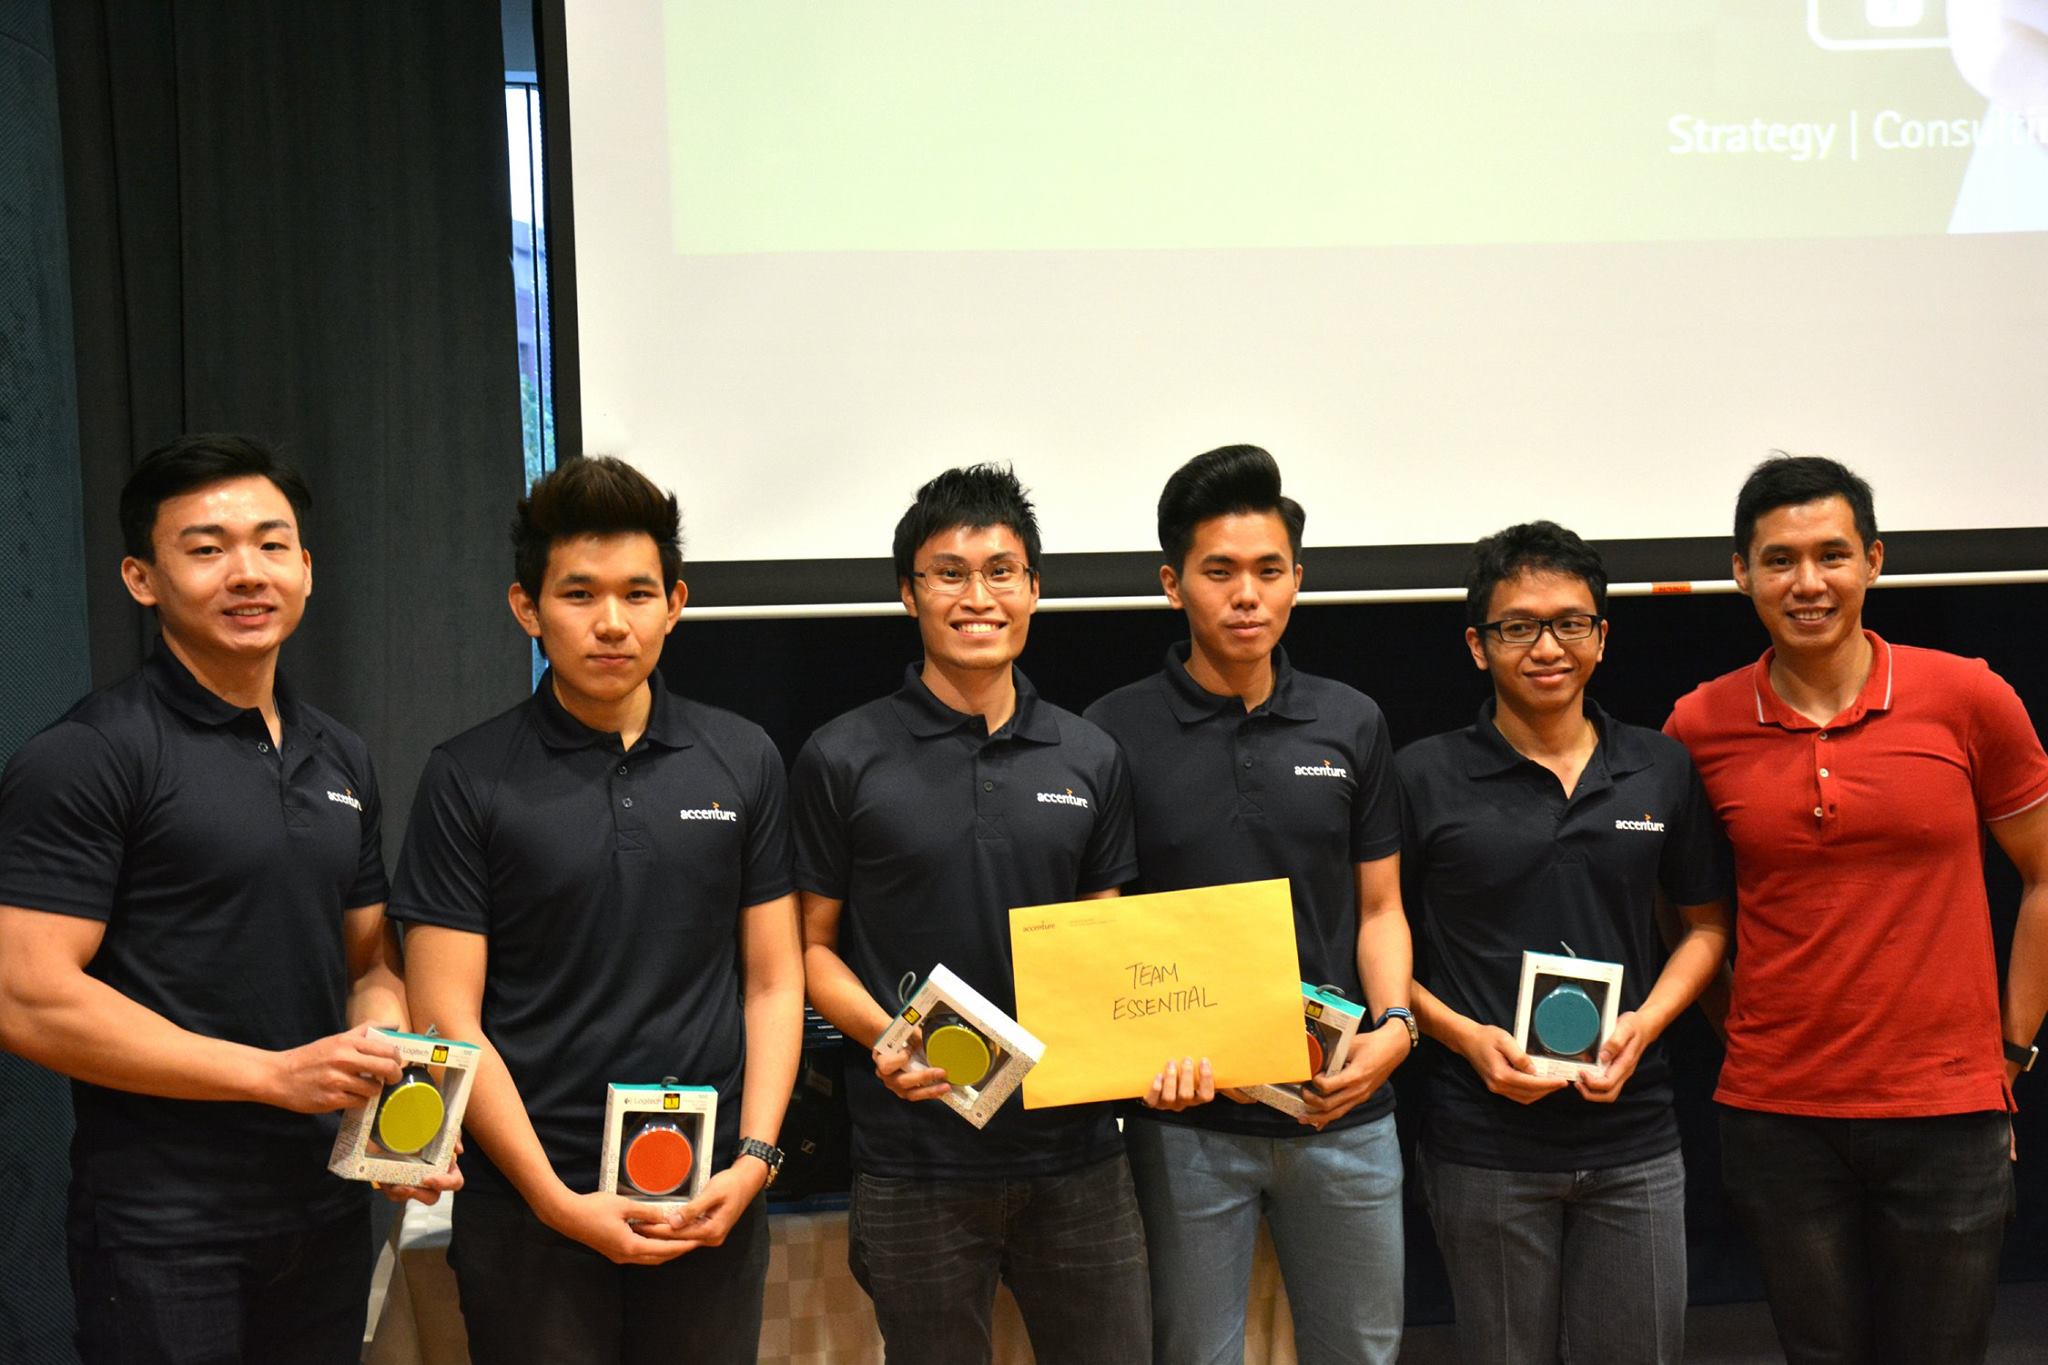 Team Essential - Best User Experience" caption="An Official photo by Accenture Singapore, Team Essential won the Best User Experience. #OneDirectionBoys